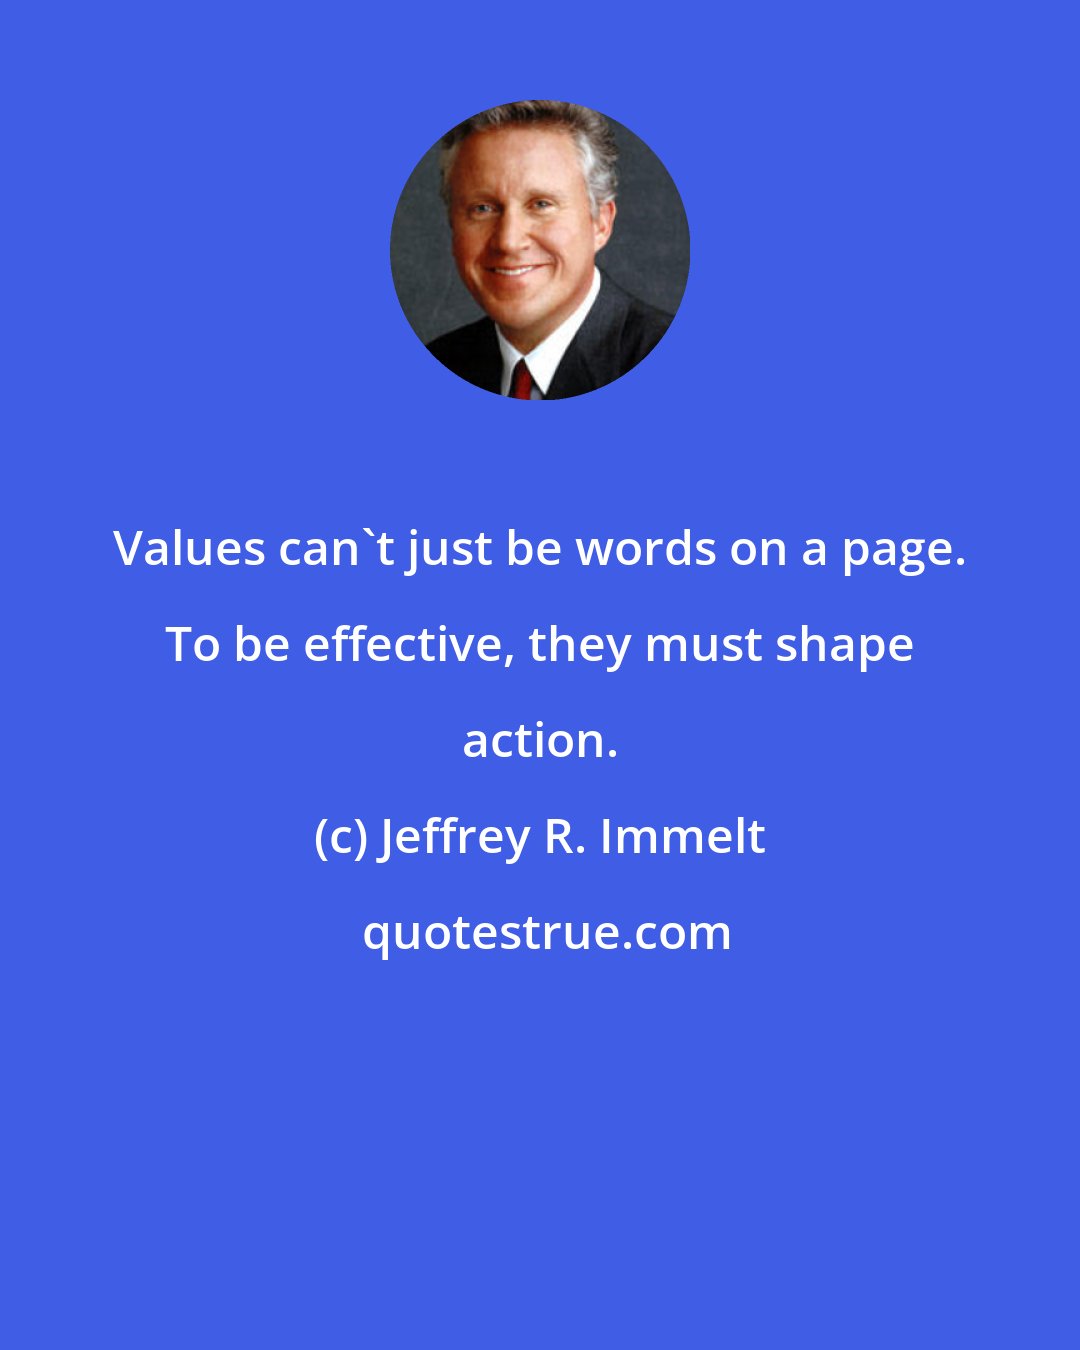 Jeffrey R. Immelt: Values can't just be words on a page. To be effective, they must shape action.